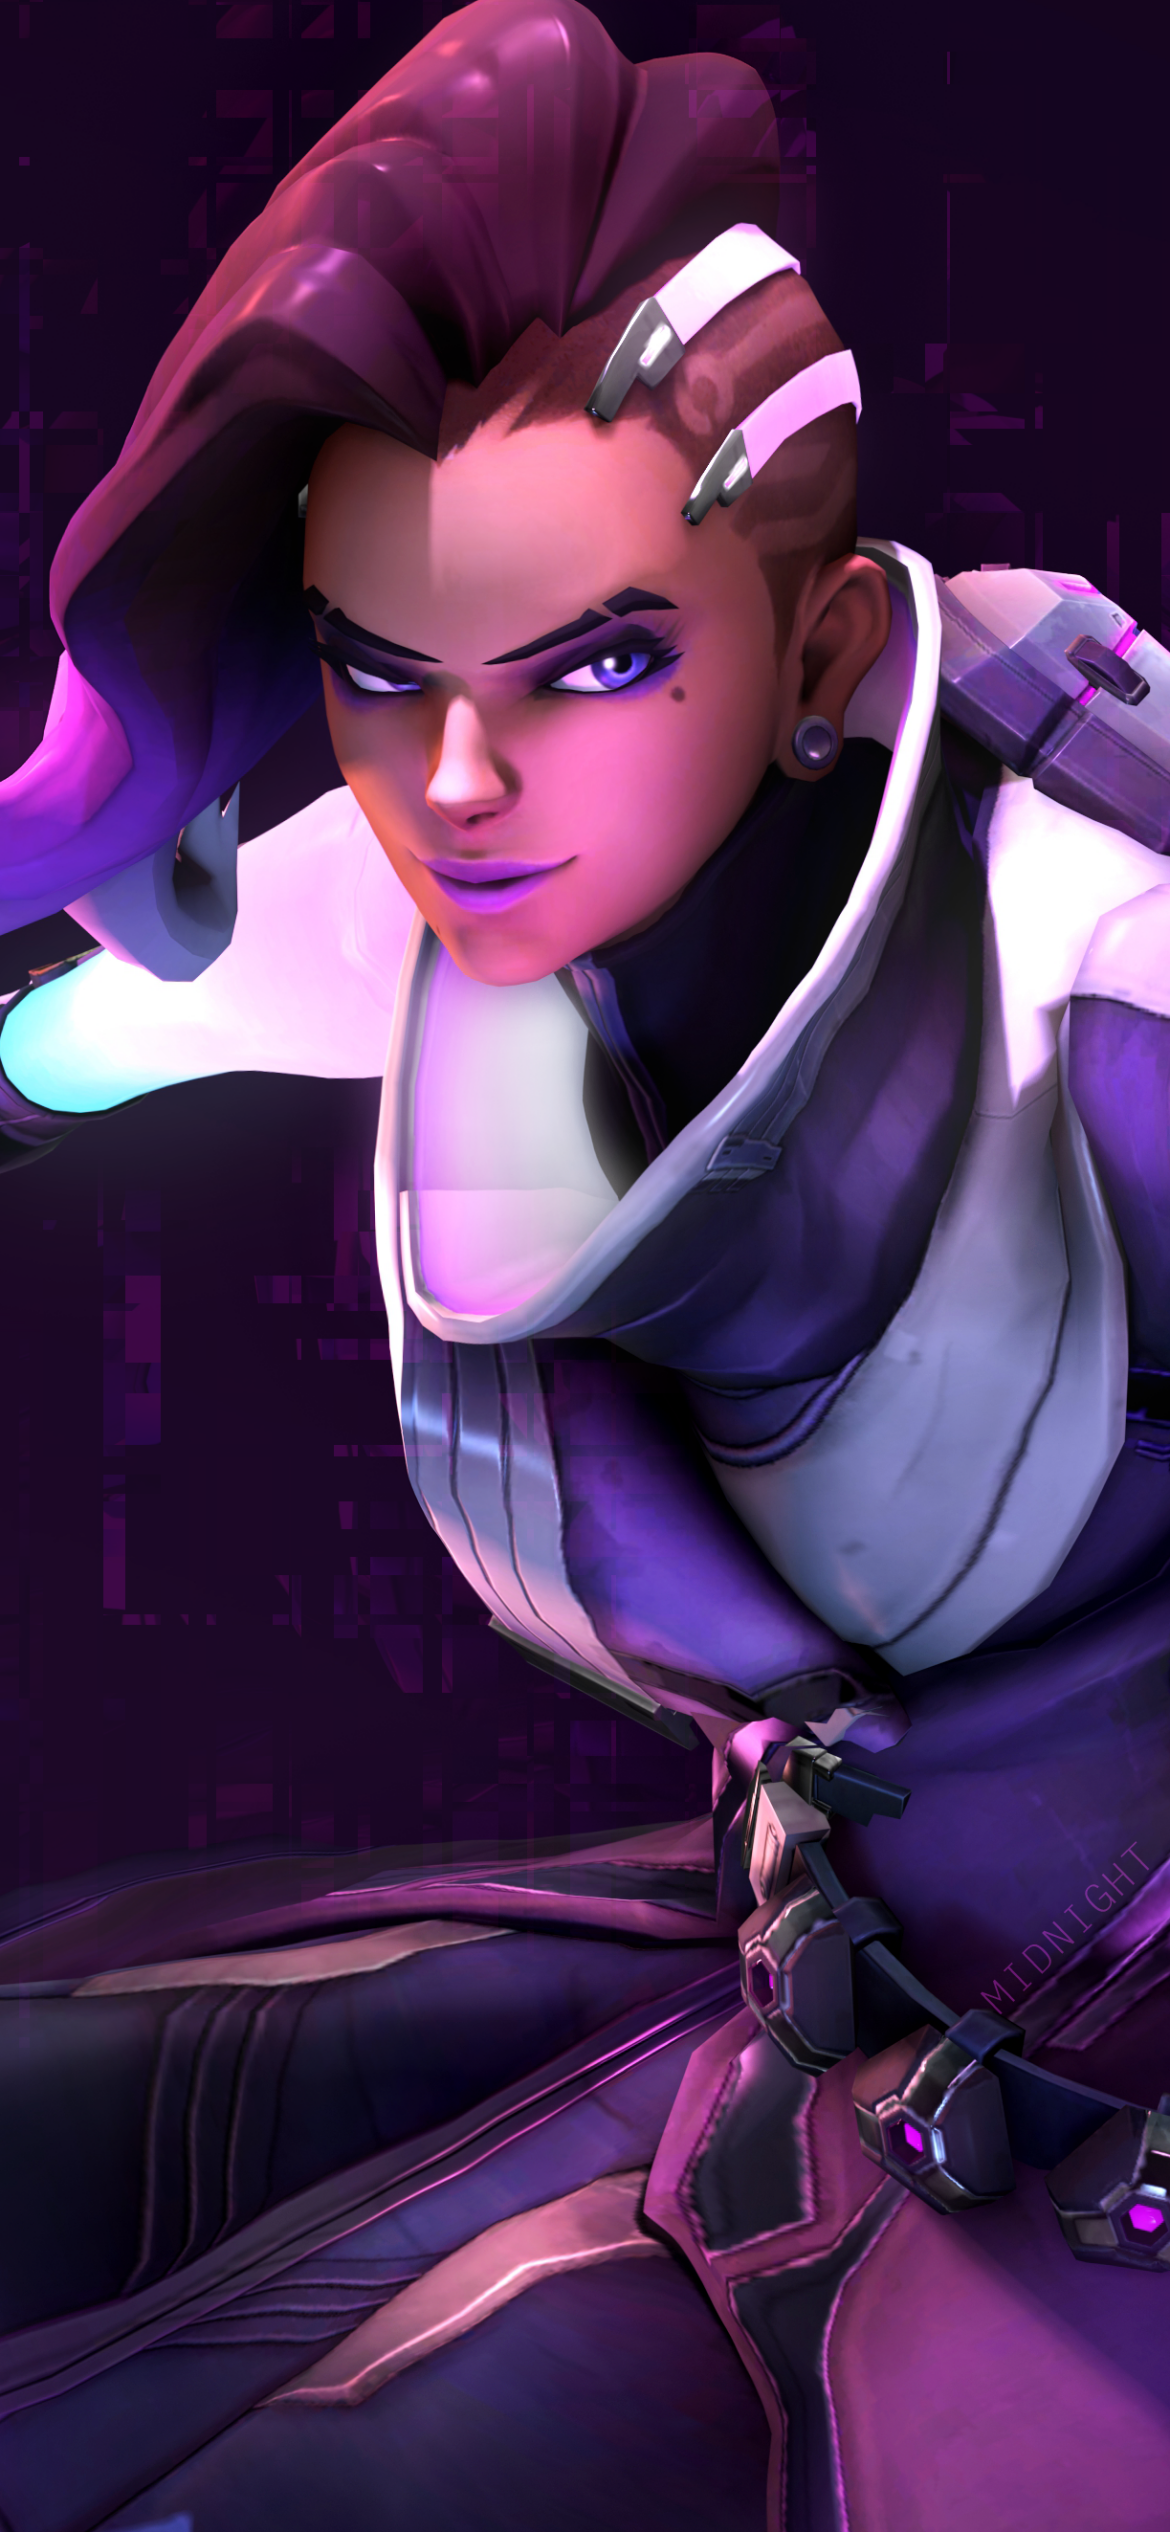 Sombra - Overwatch by Its-Midnight-Reaper